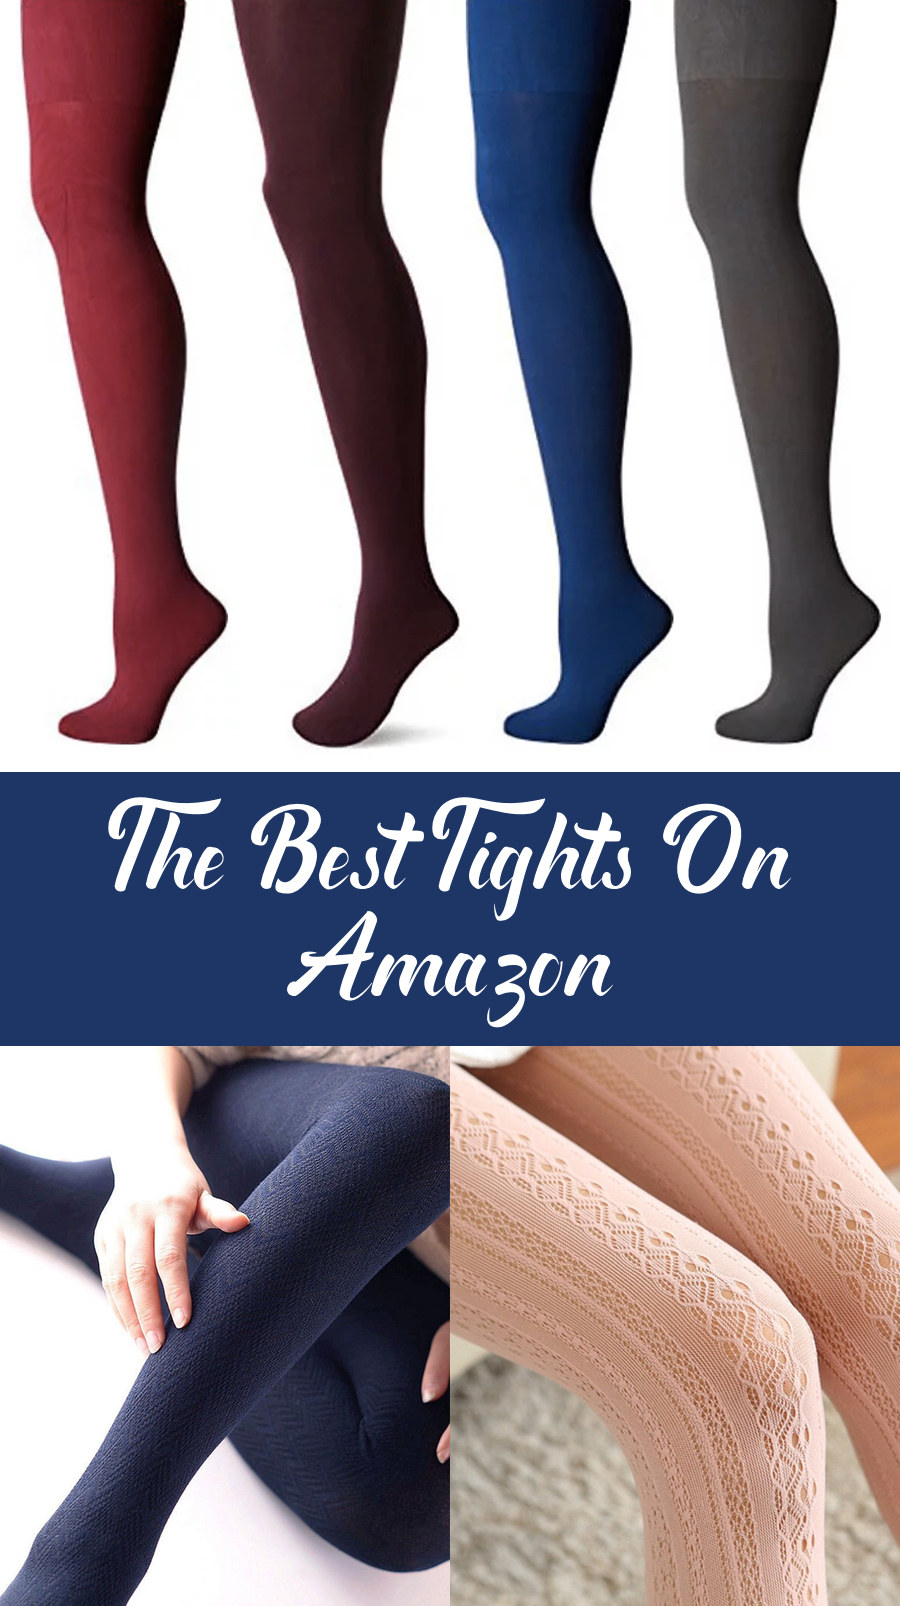 You can get these best-selling tights for $35 if your name is Amy